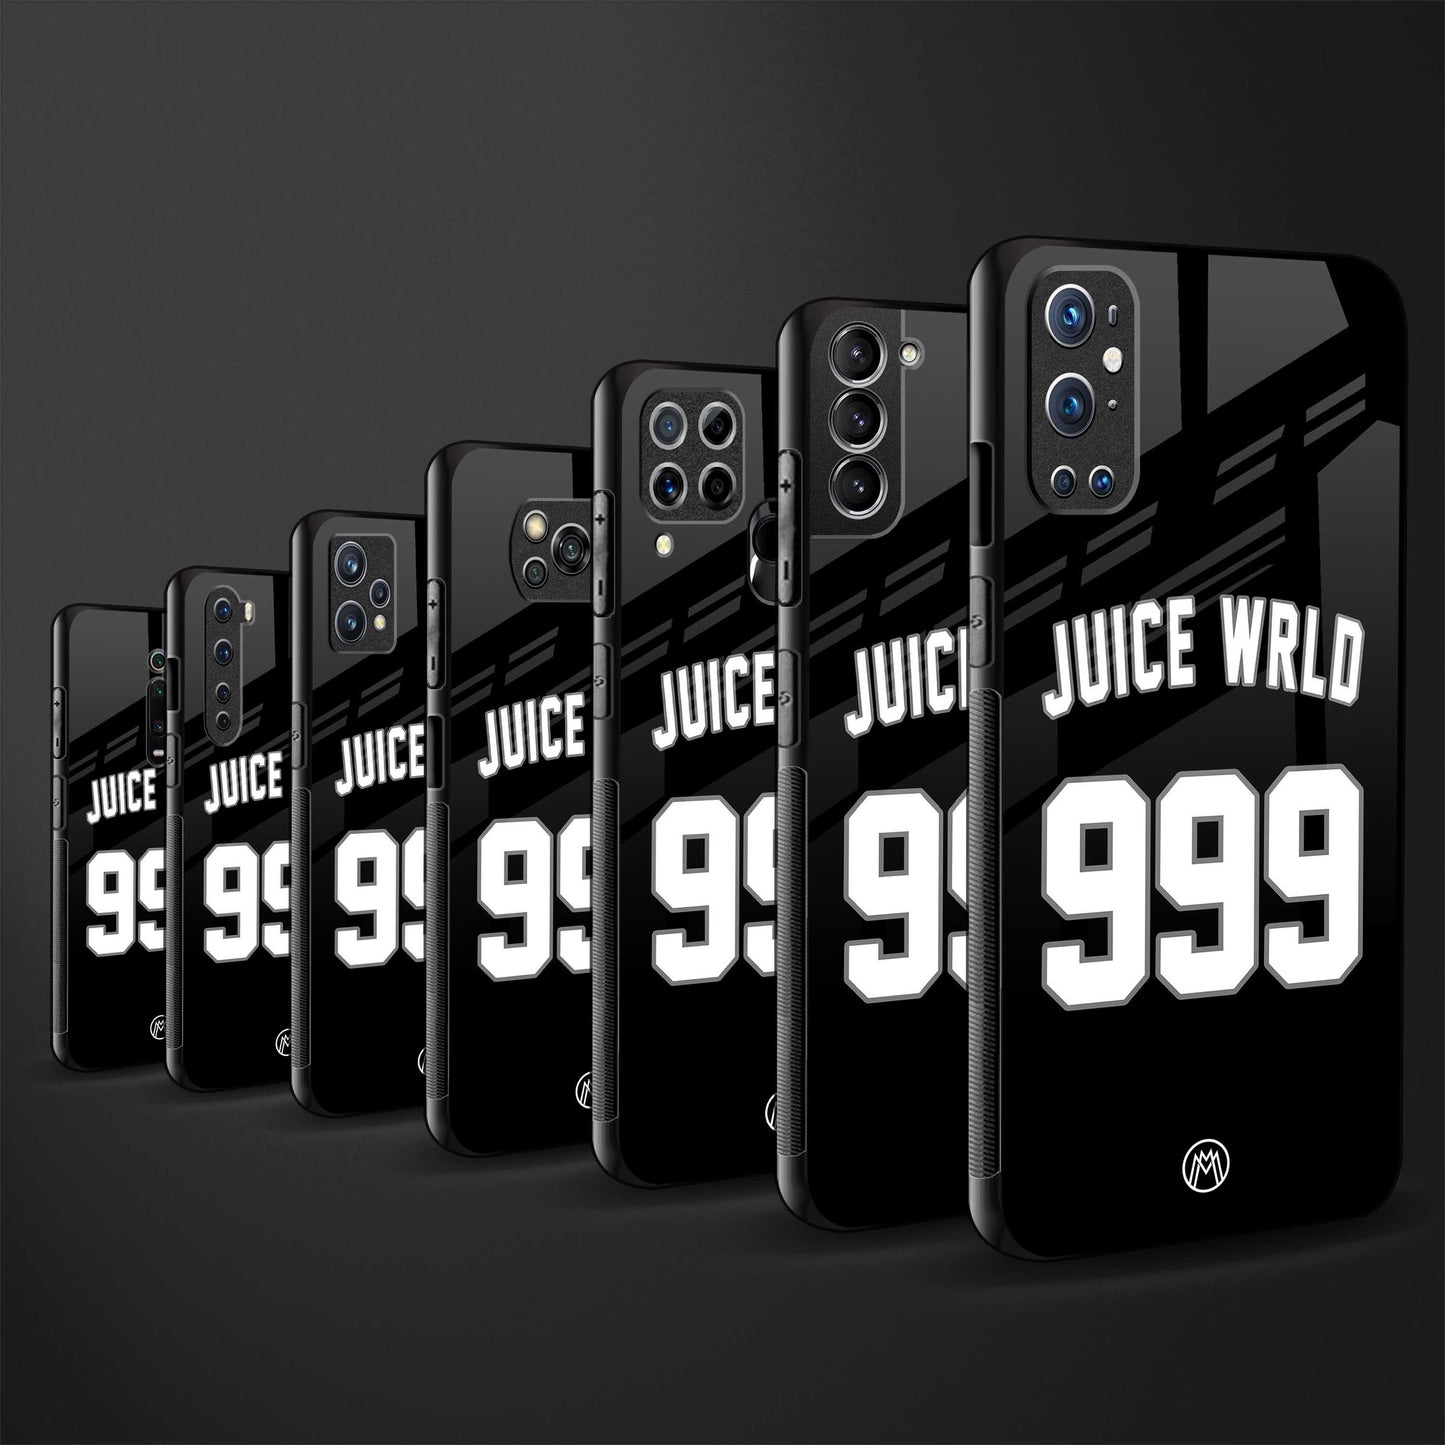 juice wrld 999 back phone cover | glass case for samsung galaxy a33 5g